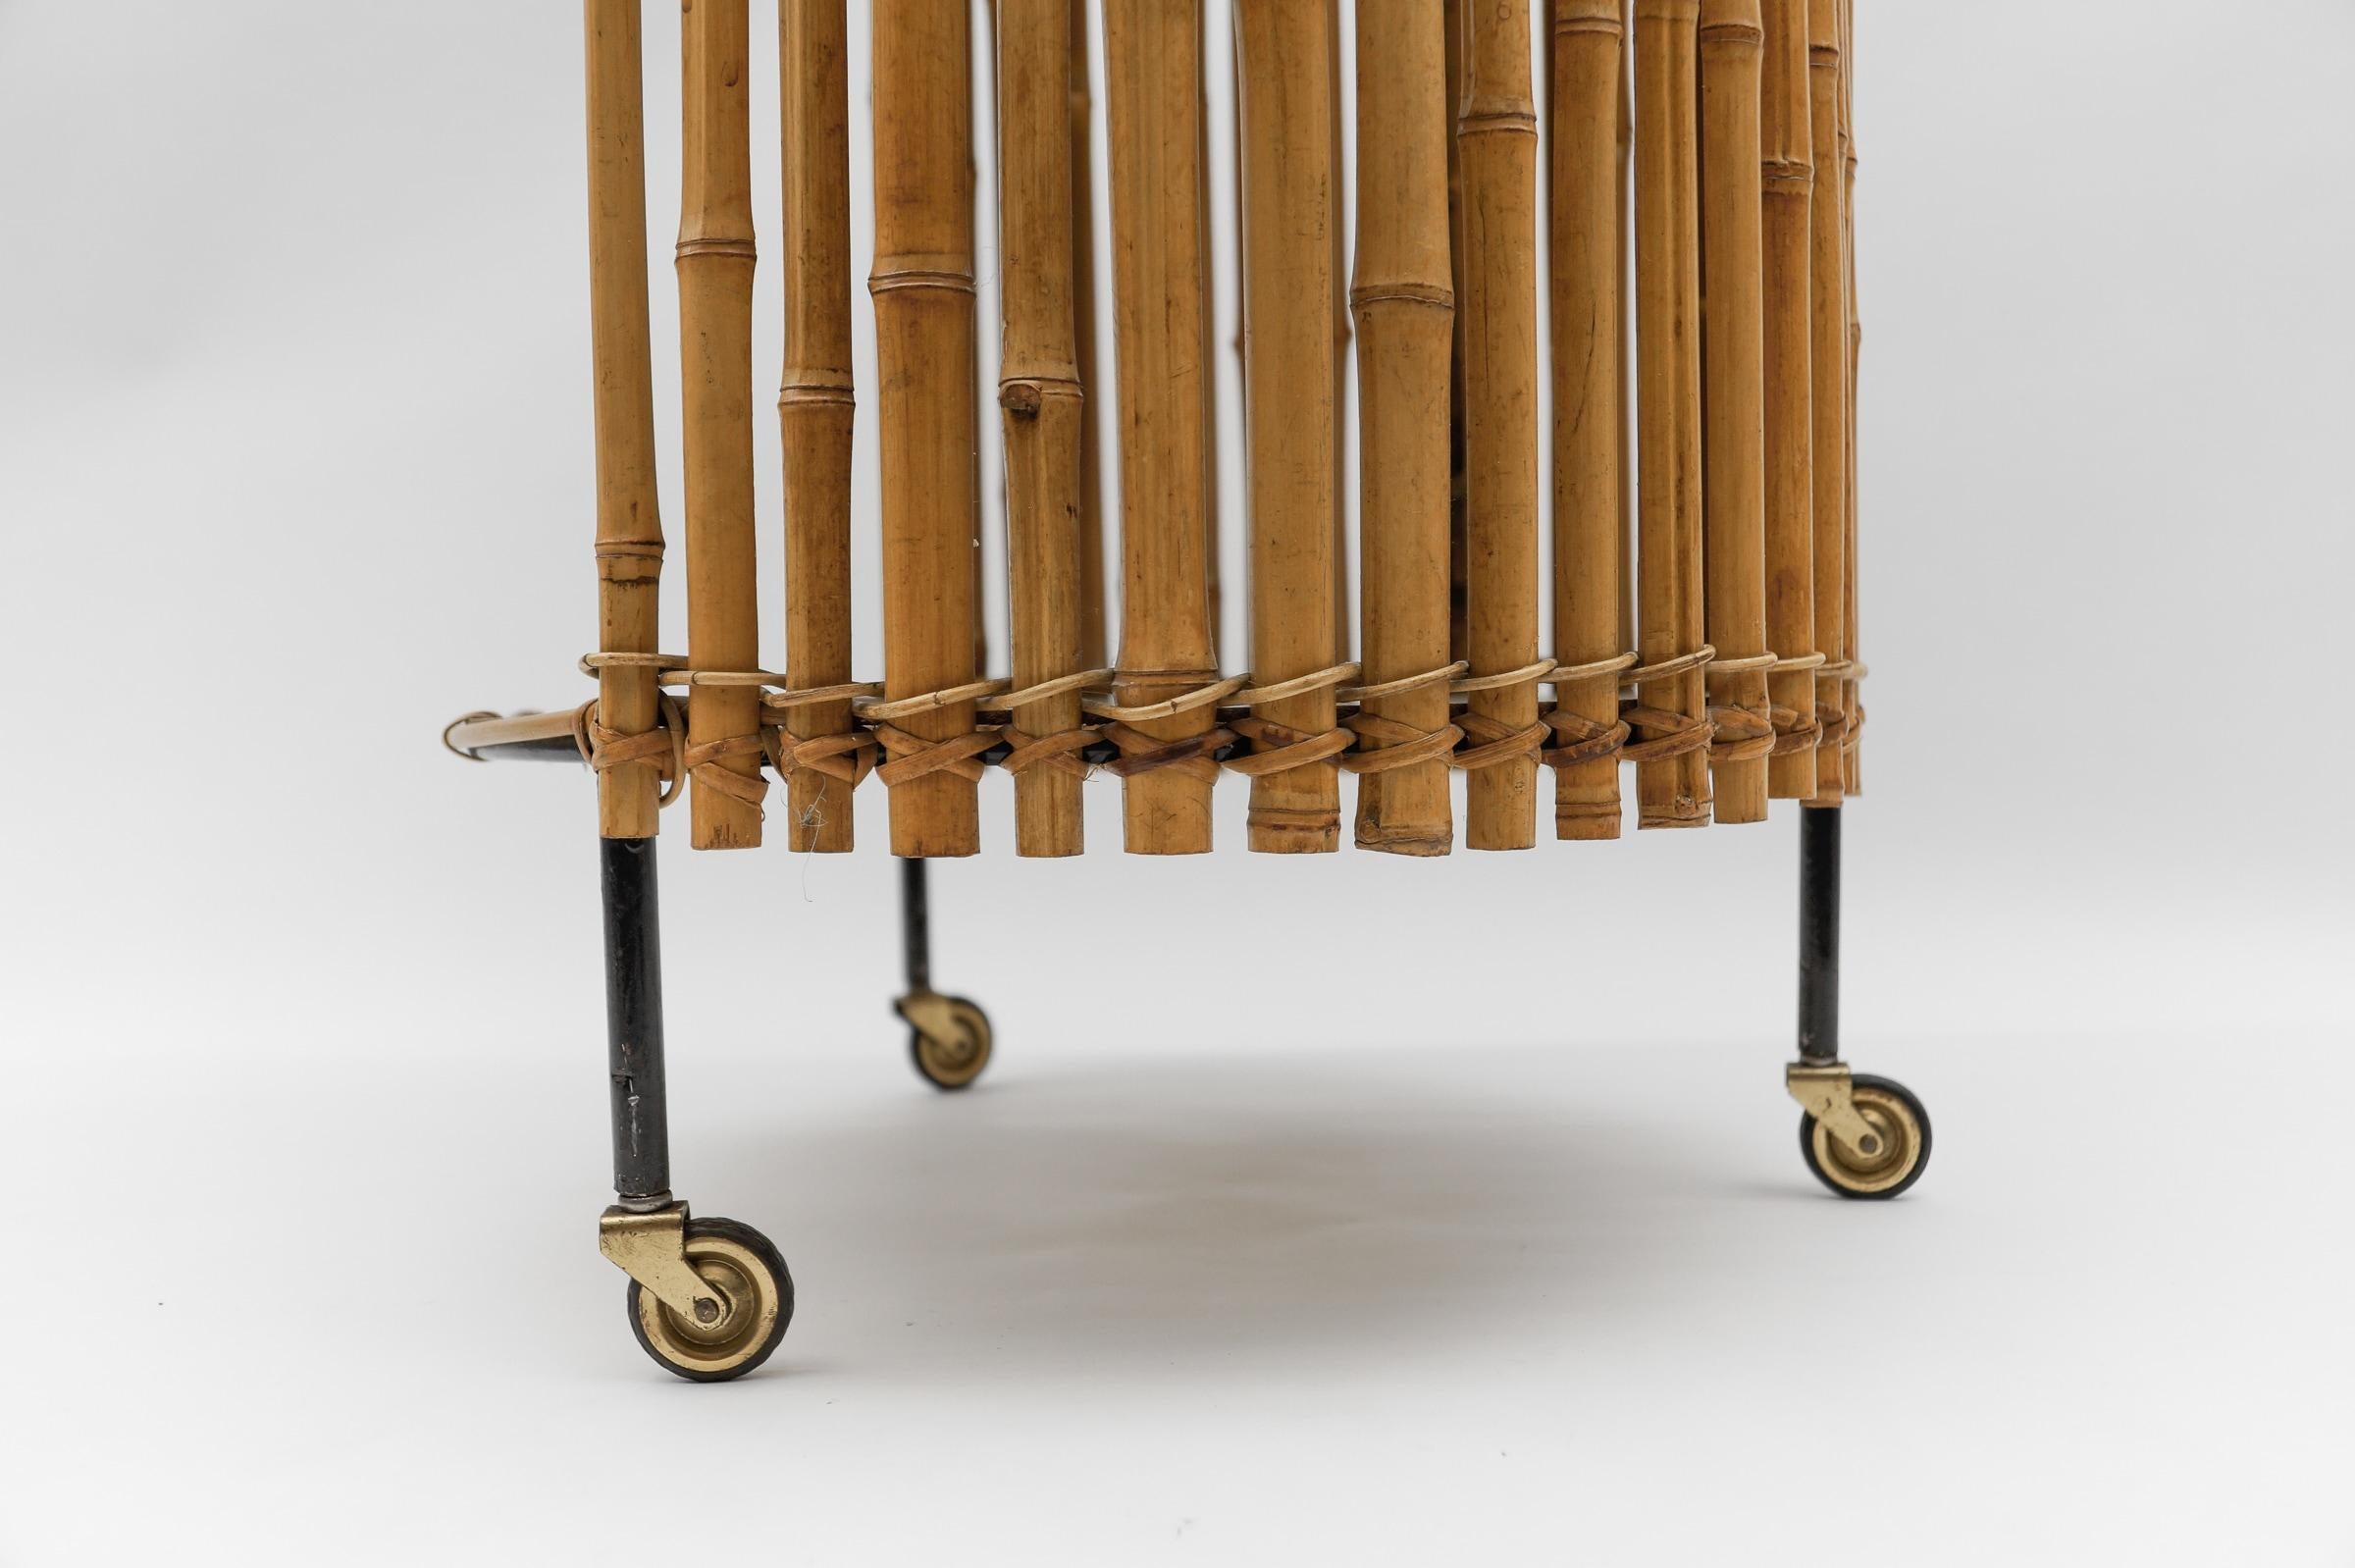 Stunning Mid-Century Modern Round Serving Cart in Bamboo and Metal, 1950s For Sale 6